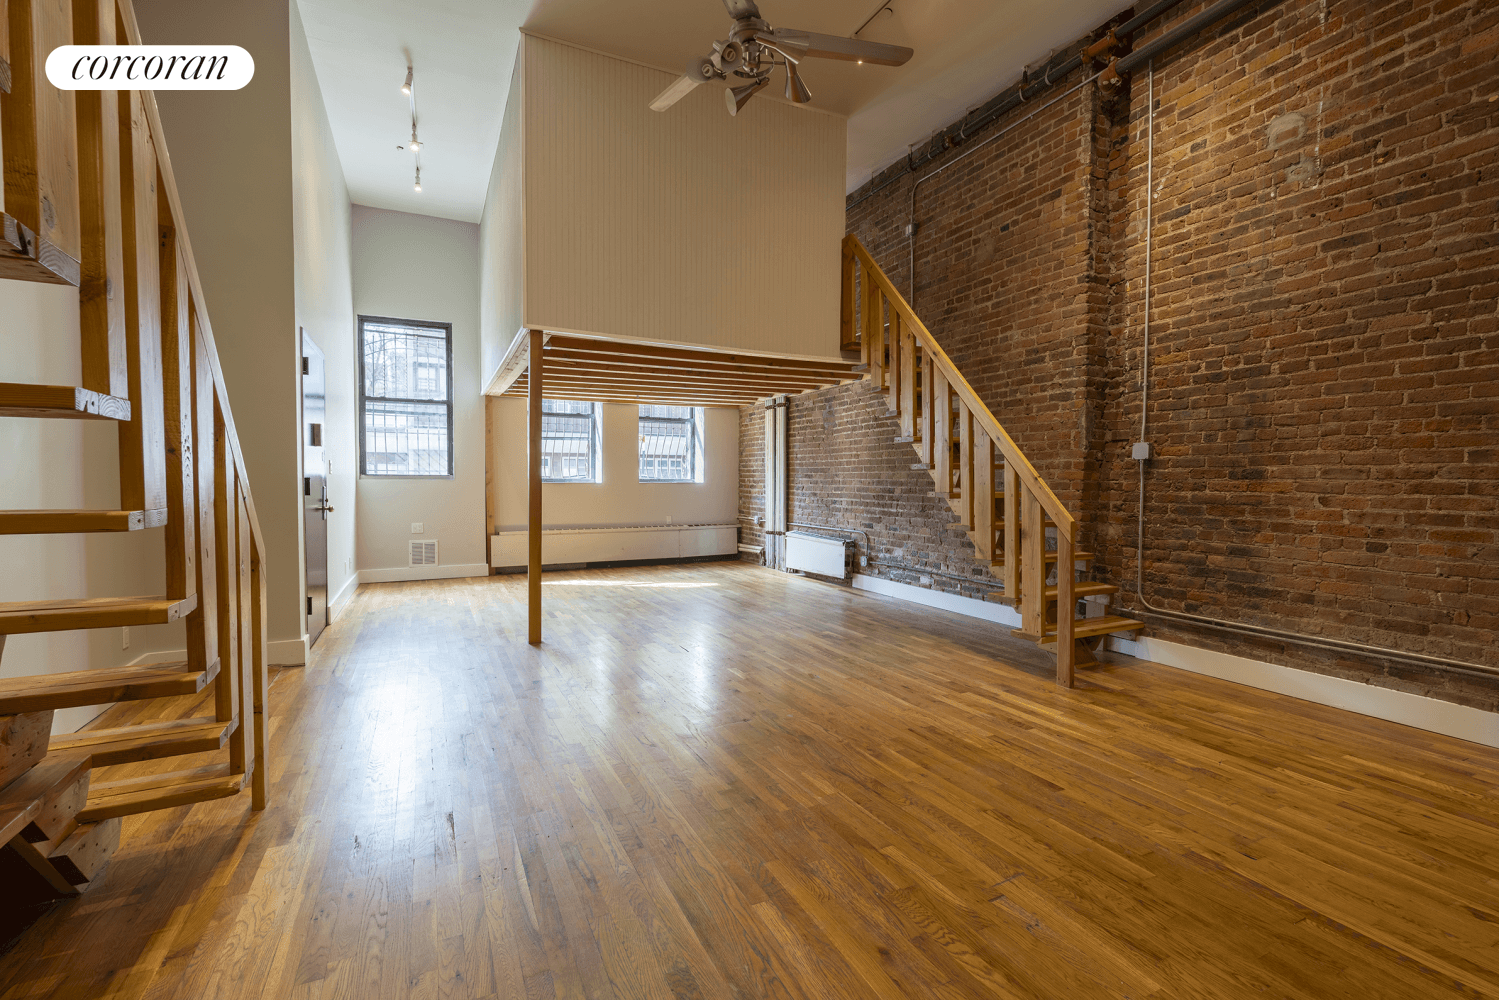 Apartment 1A is an special two bedroom loft featuring a recent renovation, over 1, 100 sq ft of living space and soaring 13'5 ceilings.